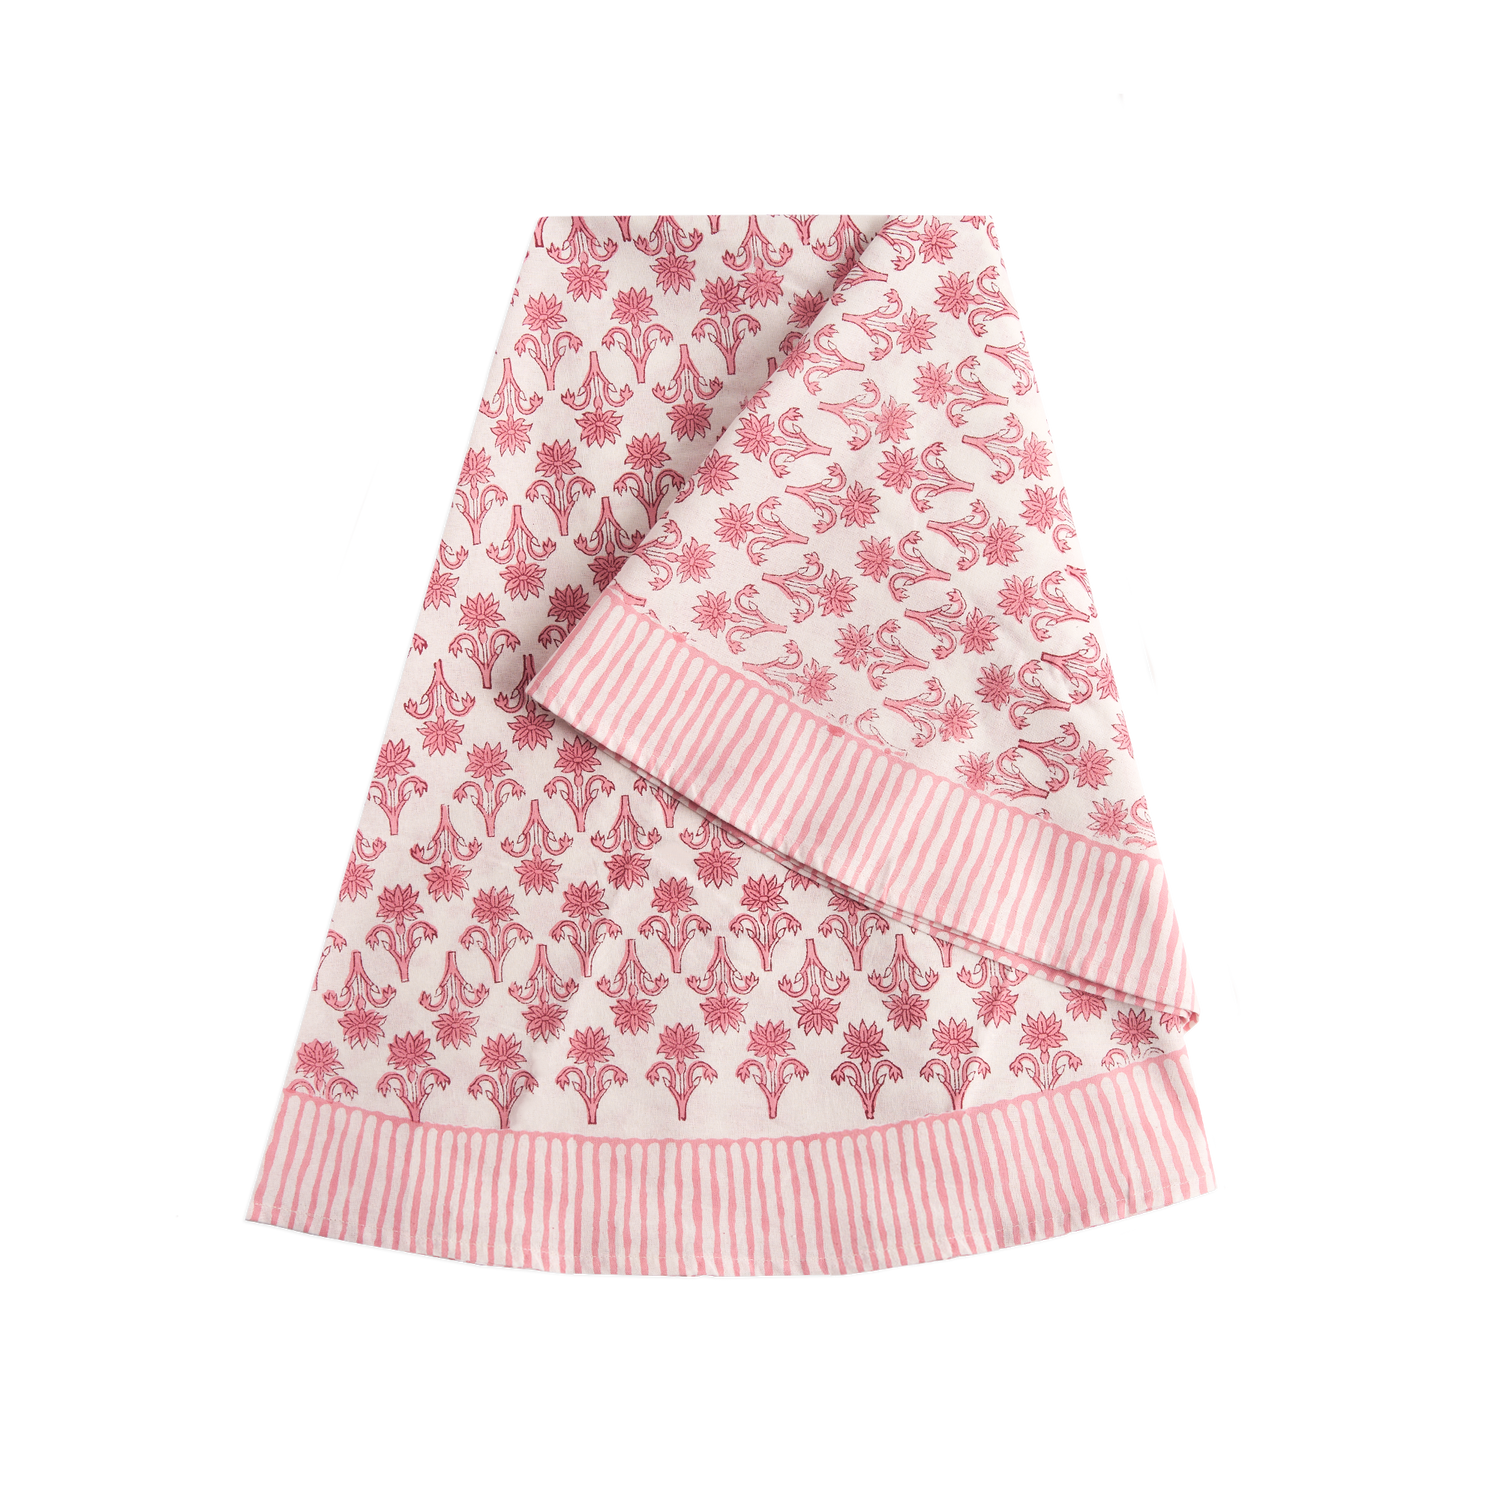 Lily tablecloth - Pink - round Ø 150 cm